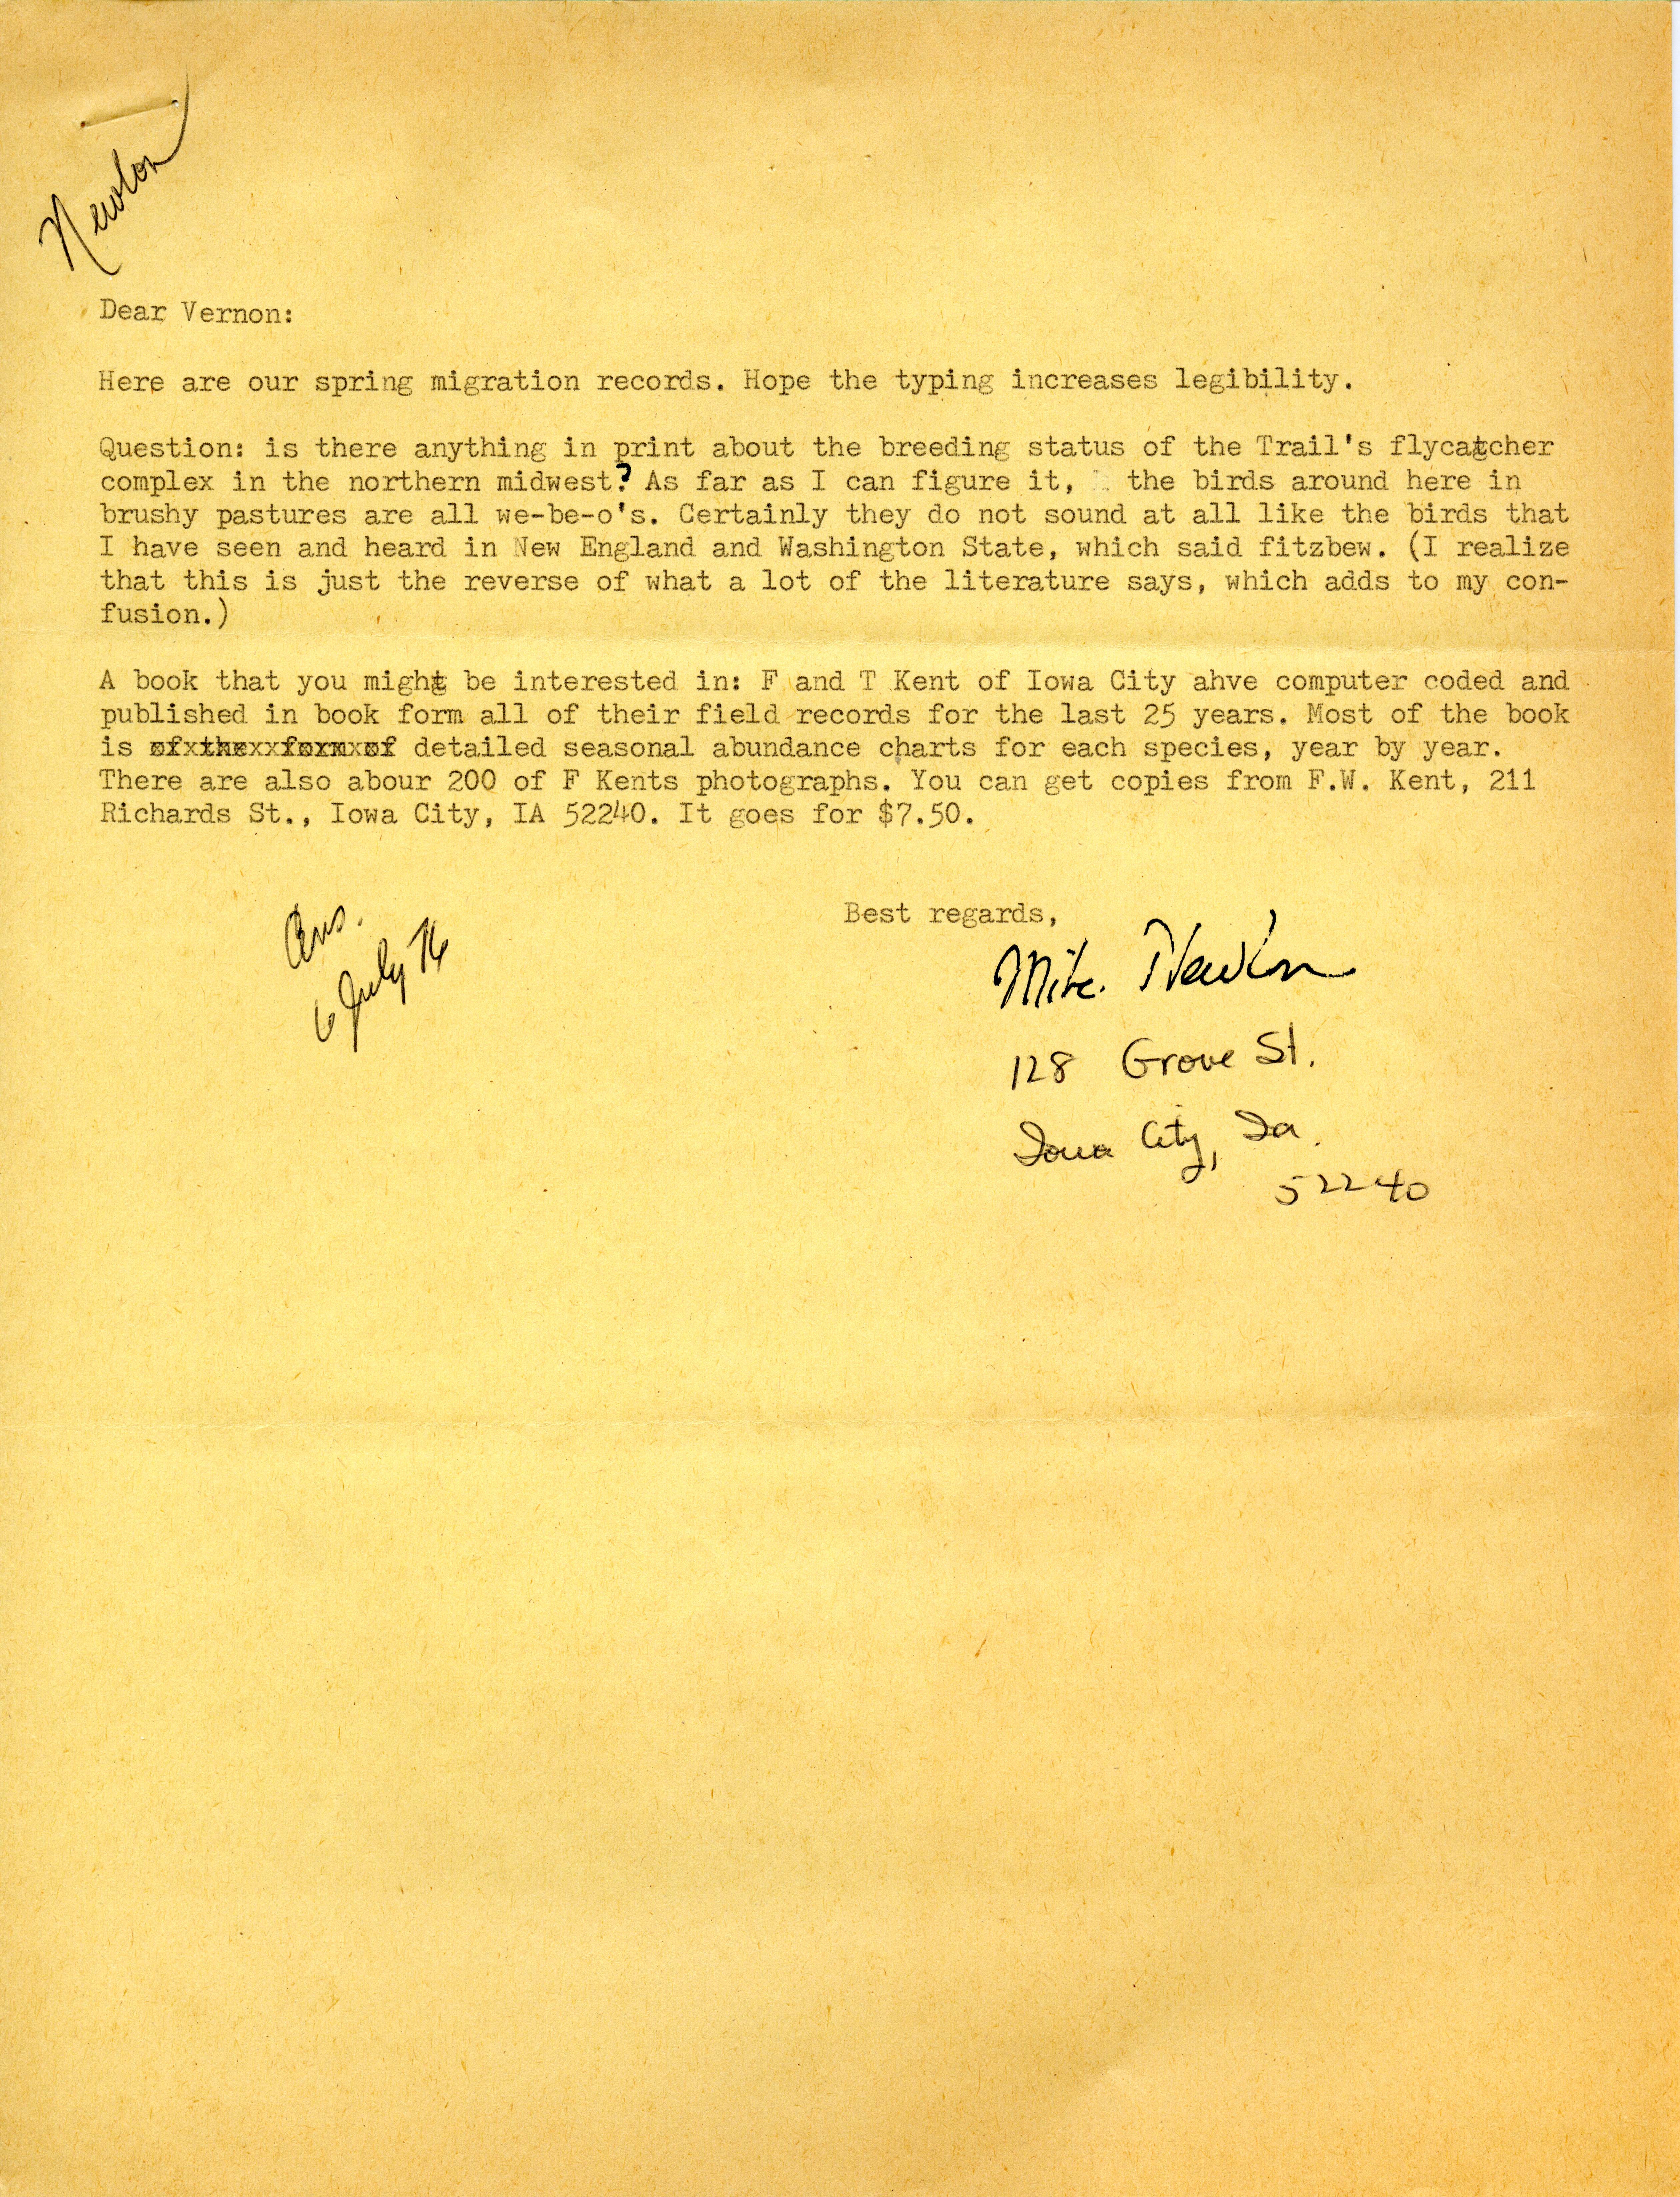 Letter and annotated bird sighting list from Mike Newlon to Vernon Kleen, July 6, 1976